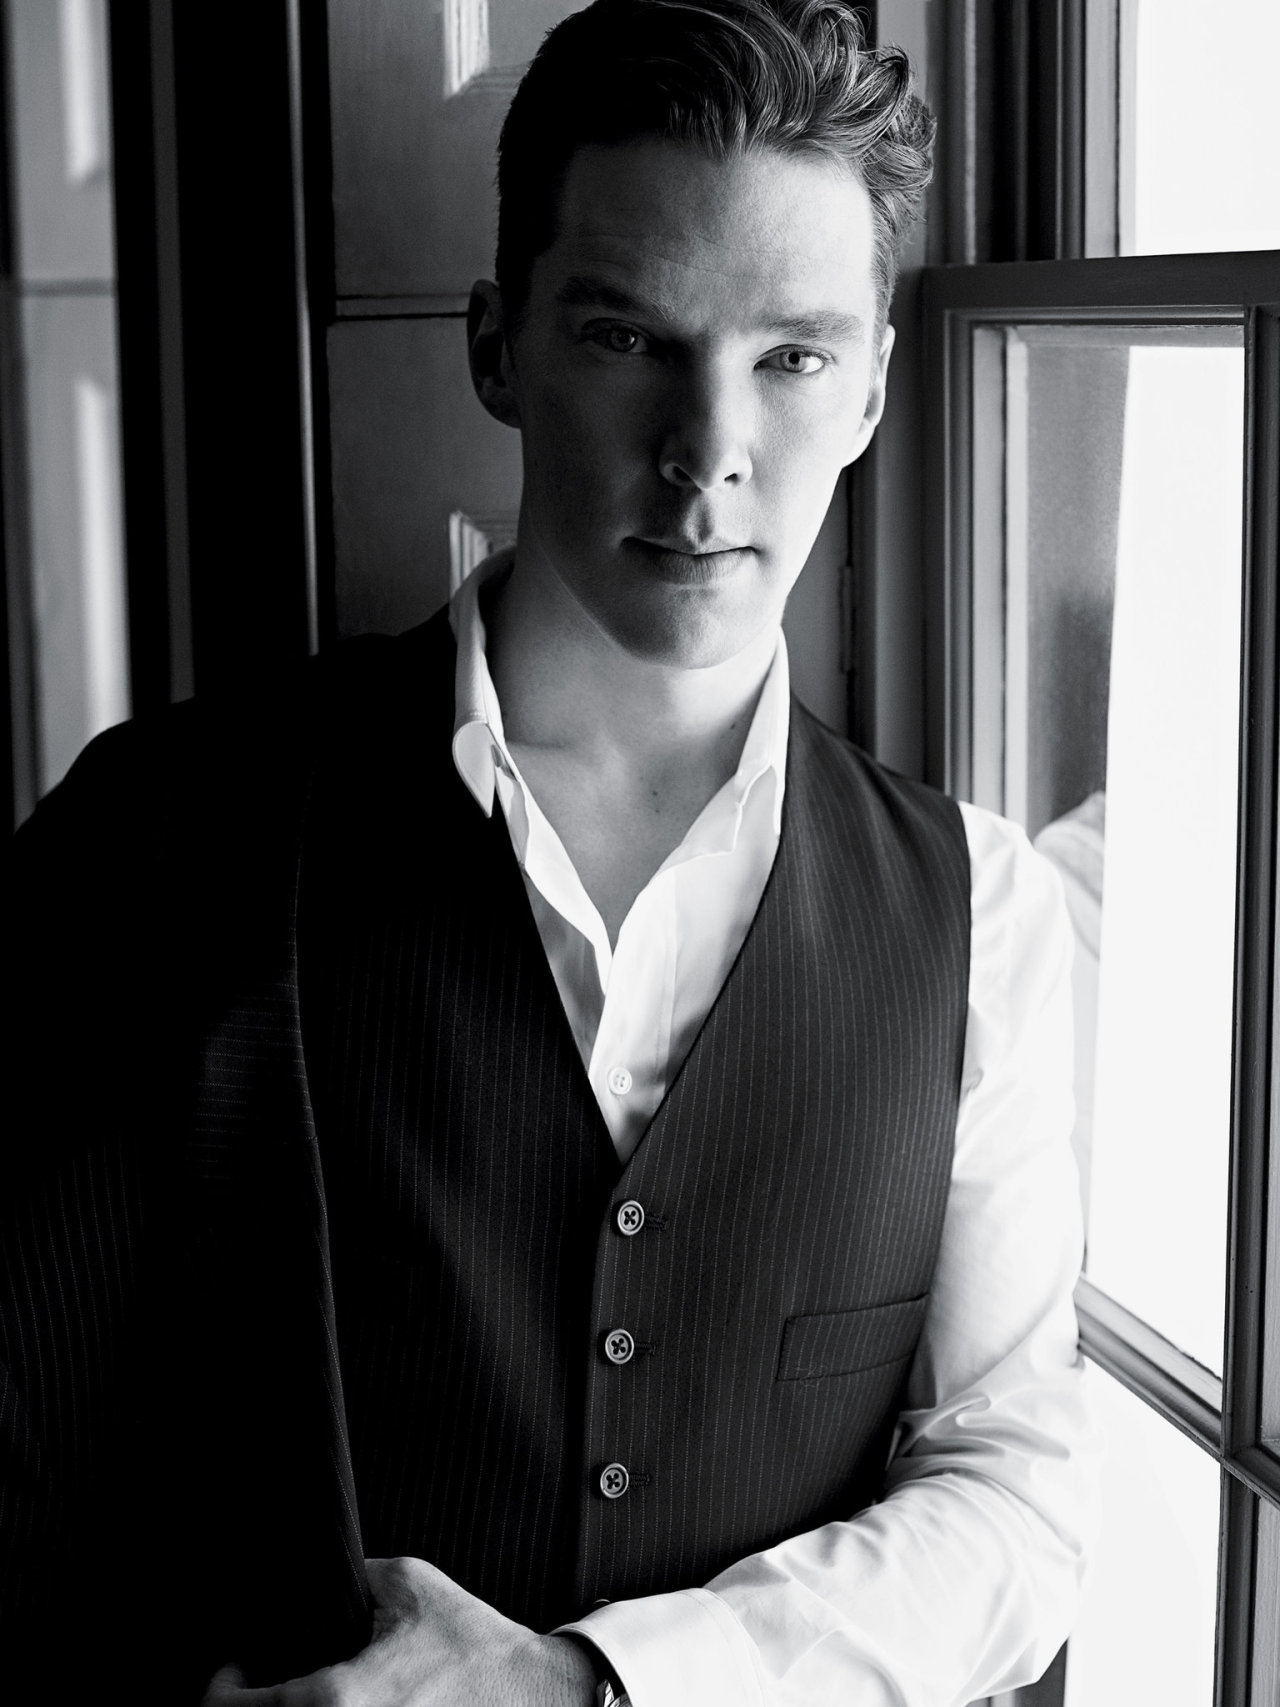 Benedict Cumberbatch, photographed by Karim Sadli for T magazine, Spring 2014.
(click the image for extremely high-res photo.)